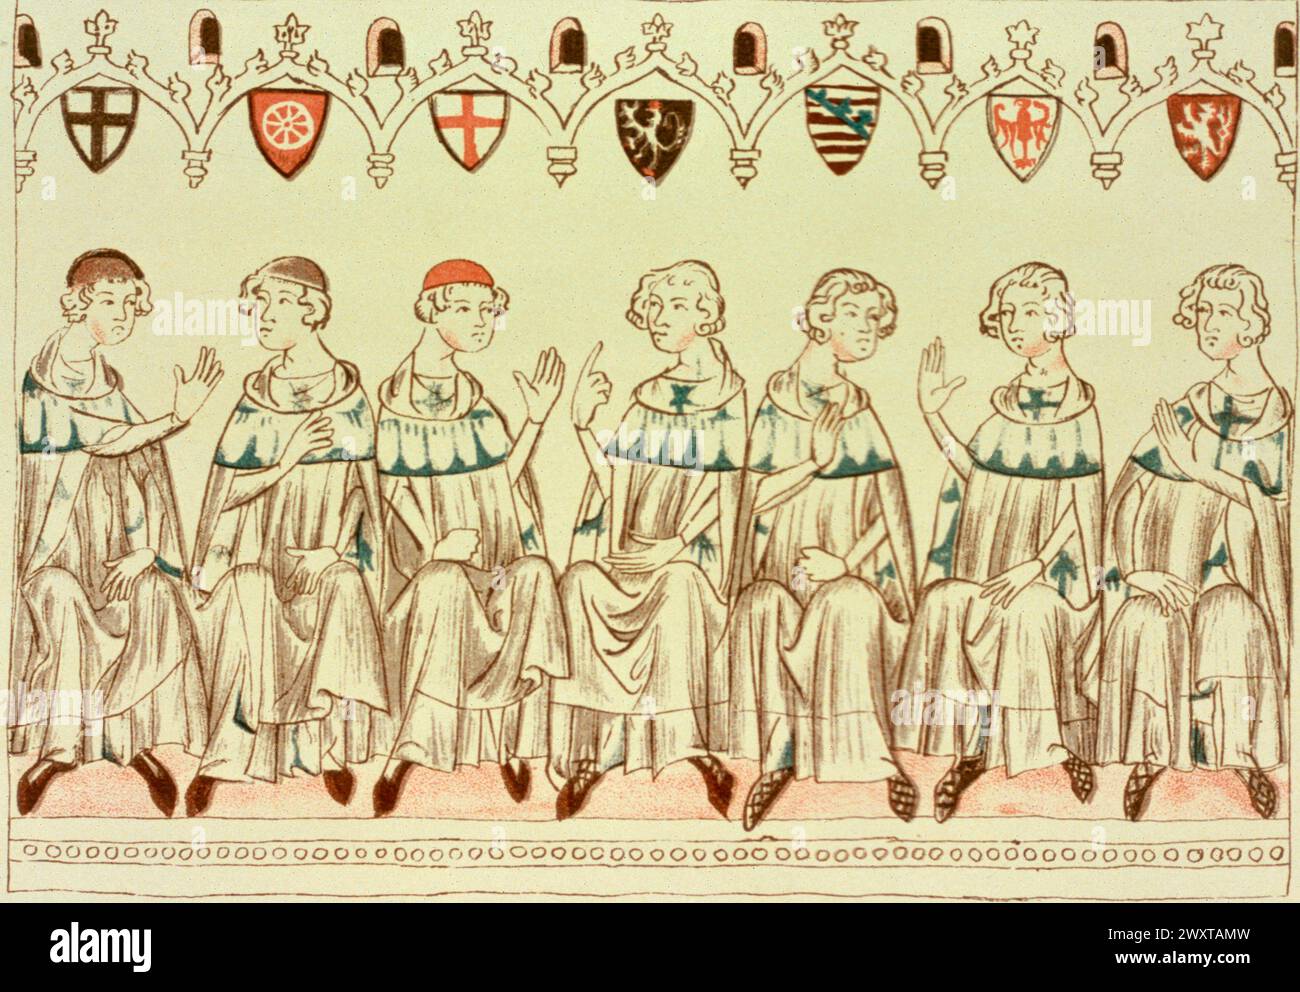 Electors of the Holy Roman Empire in council during the election of Henry VII, illustration from a manuscript, 1300s Stock Photo